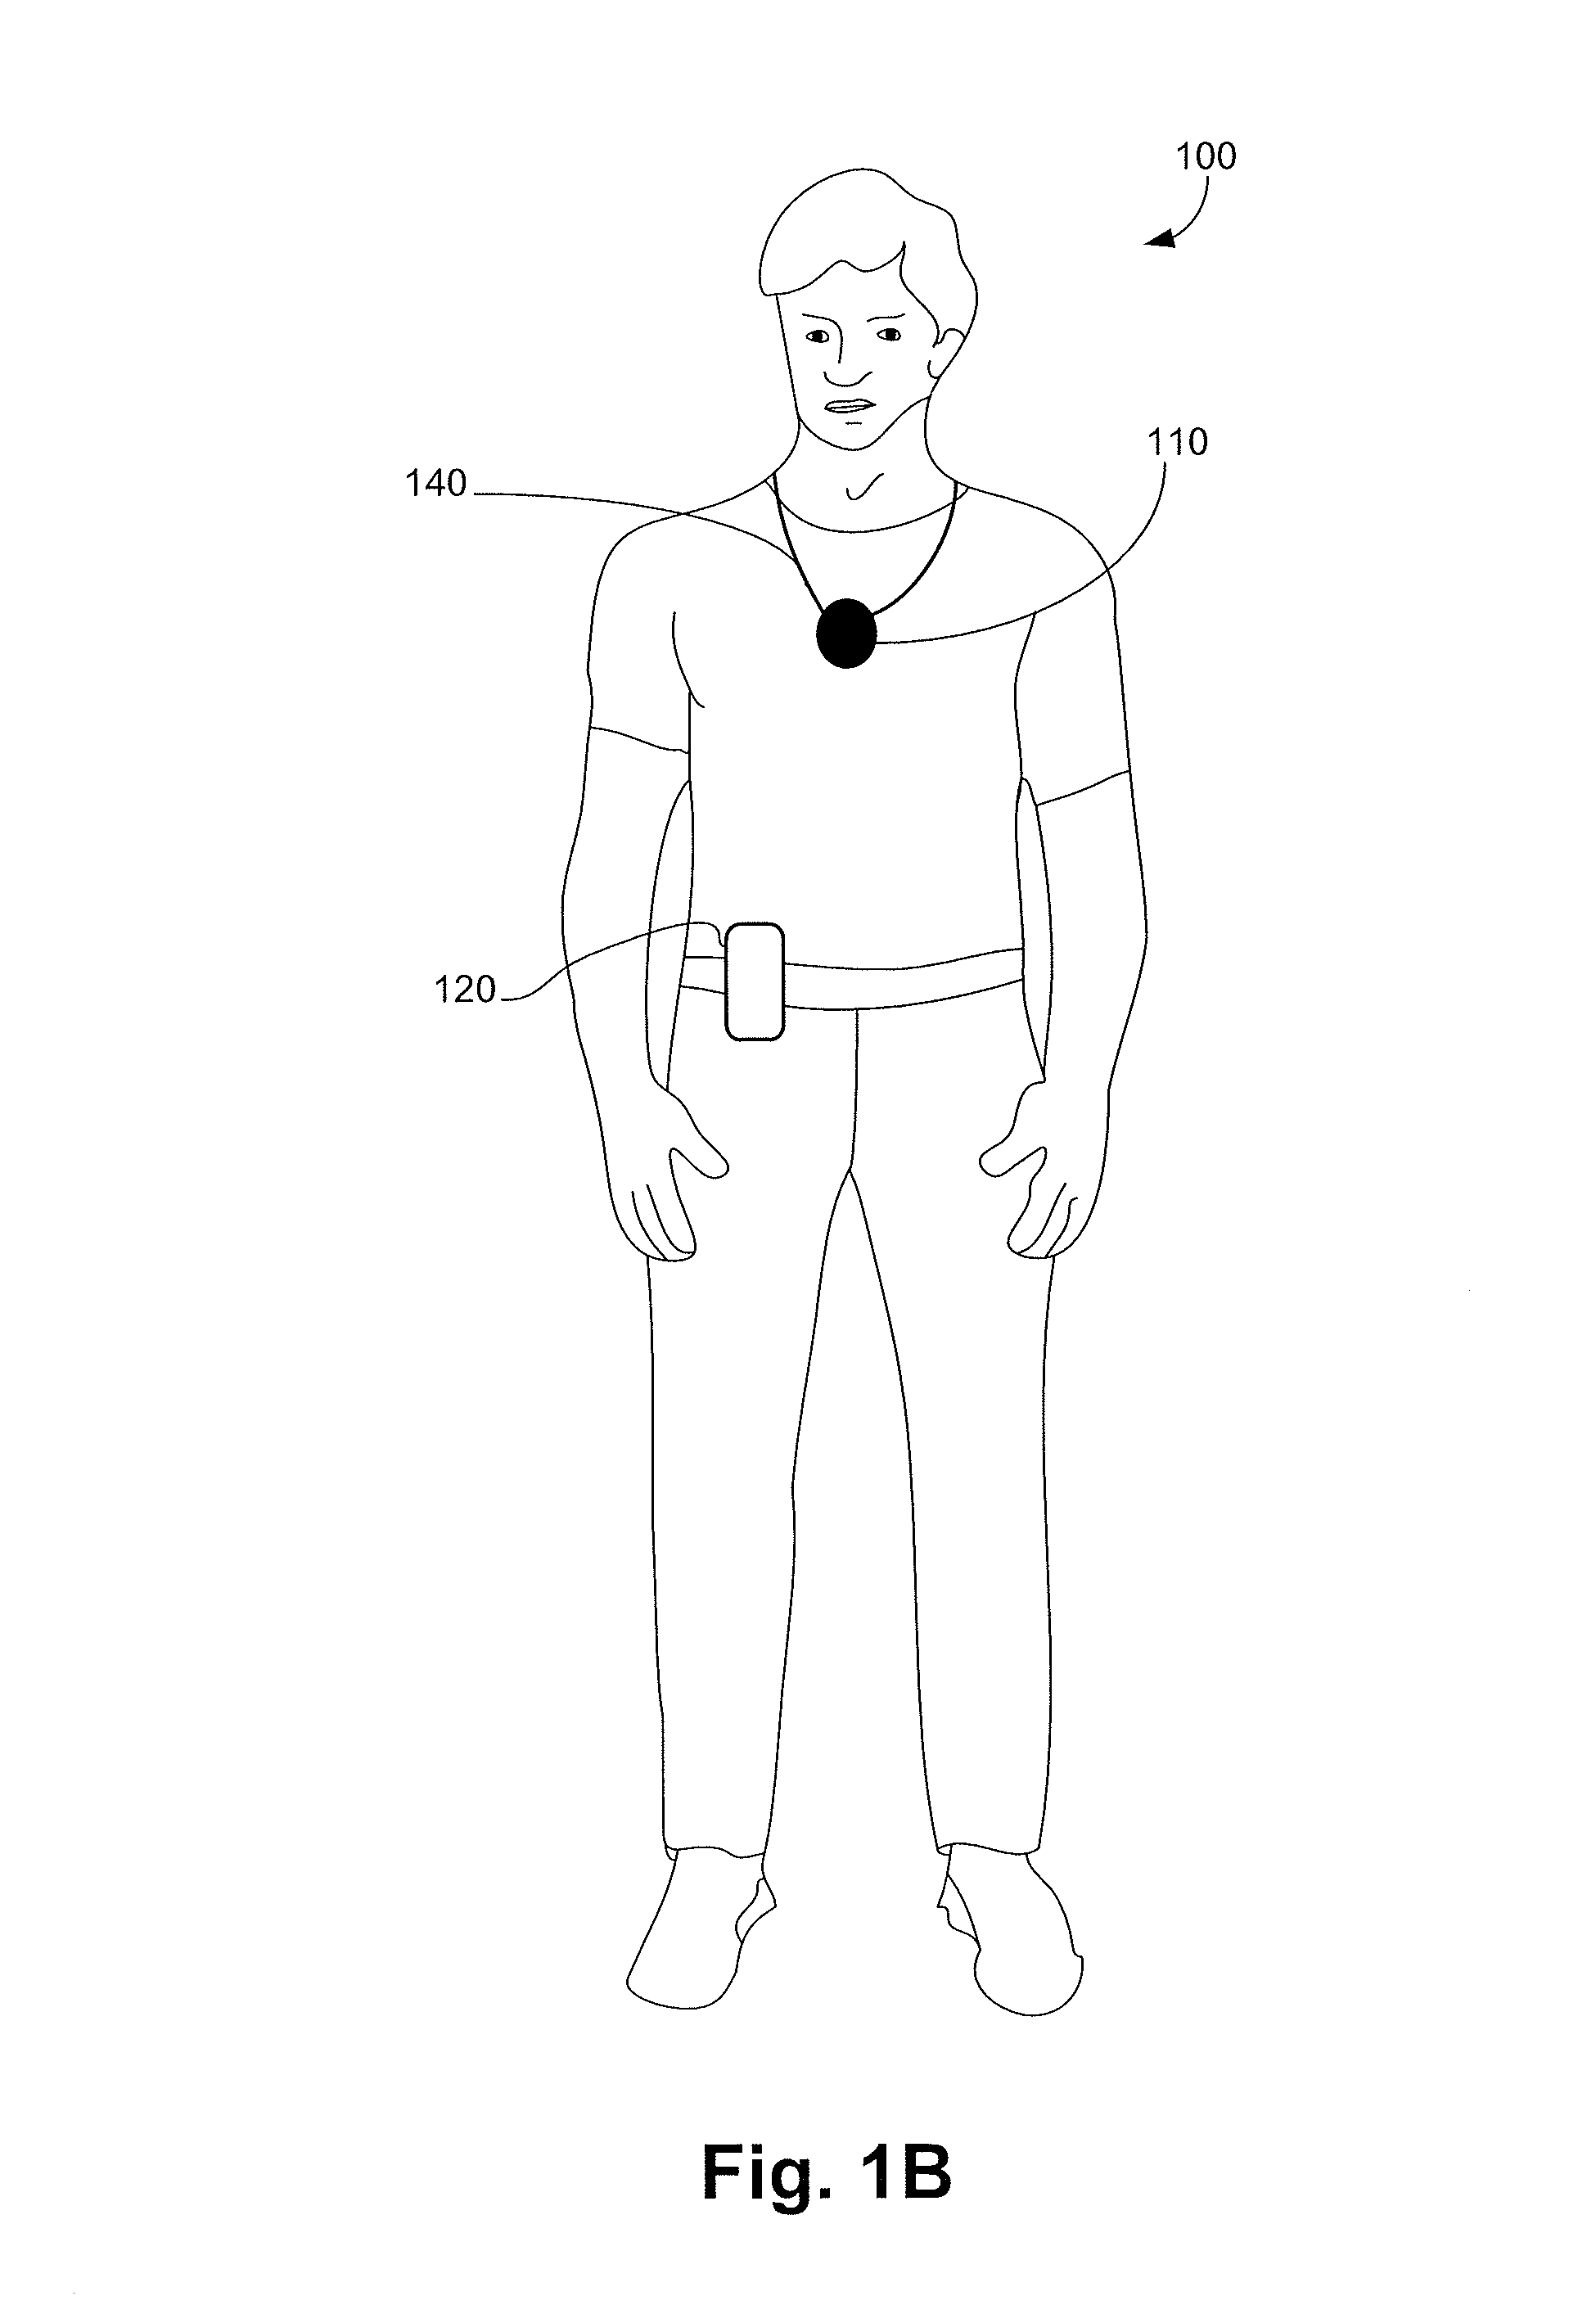 Systems and methods for remembering held items and finding lost items using wearable camera systems